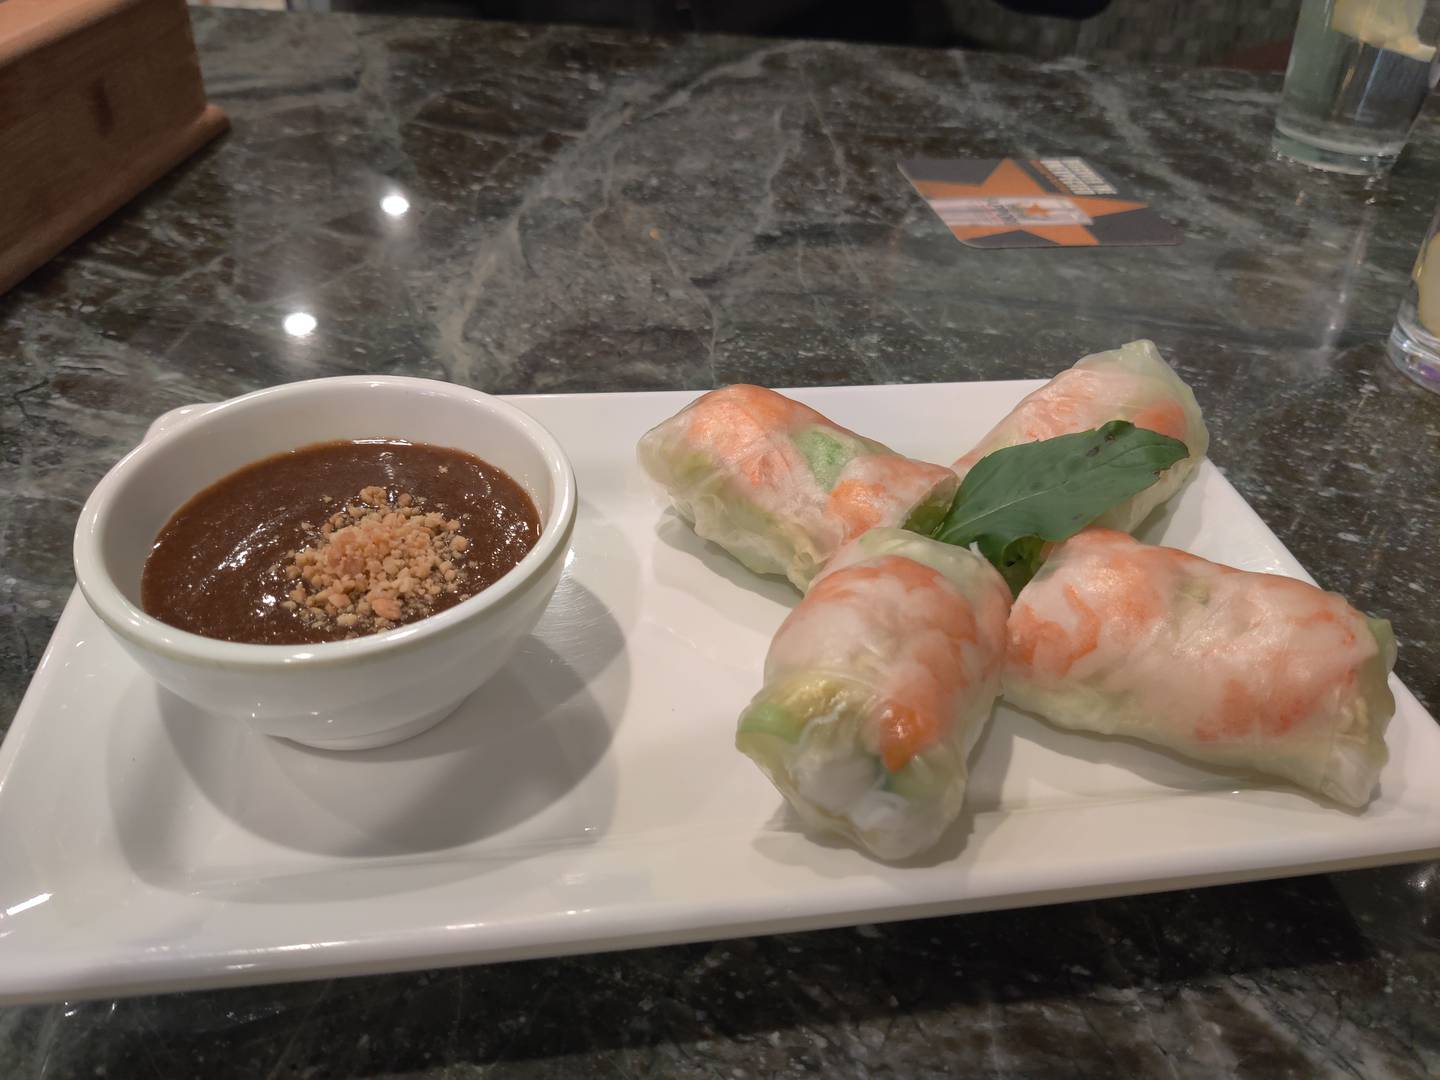 The Vietnamese restaurant Pho Xich Lo in Geneva serves spring rolls in a rice paper wrapper.